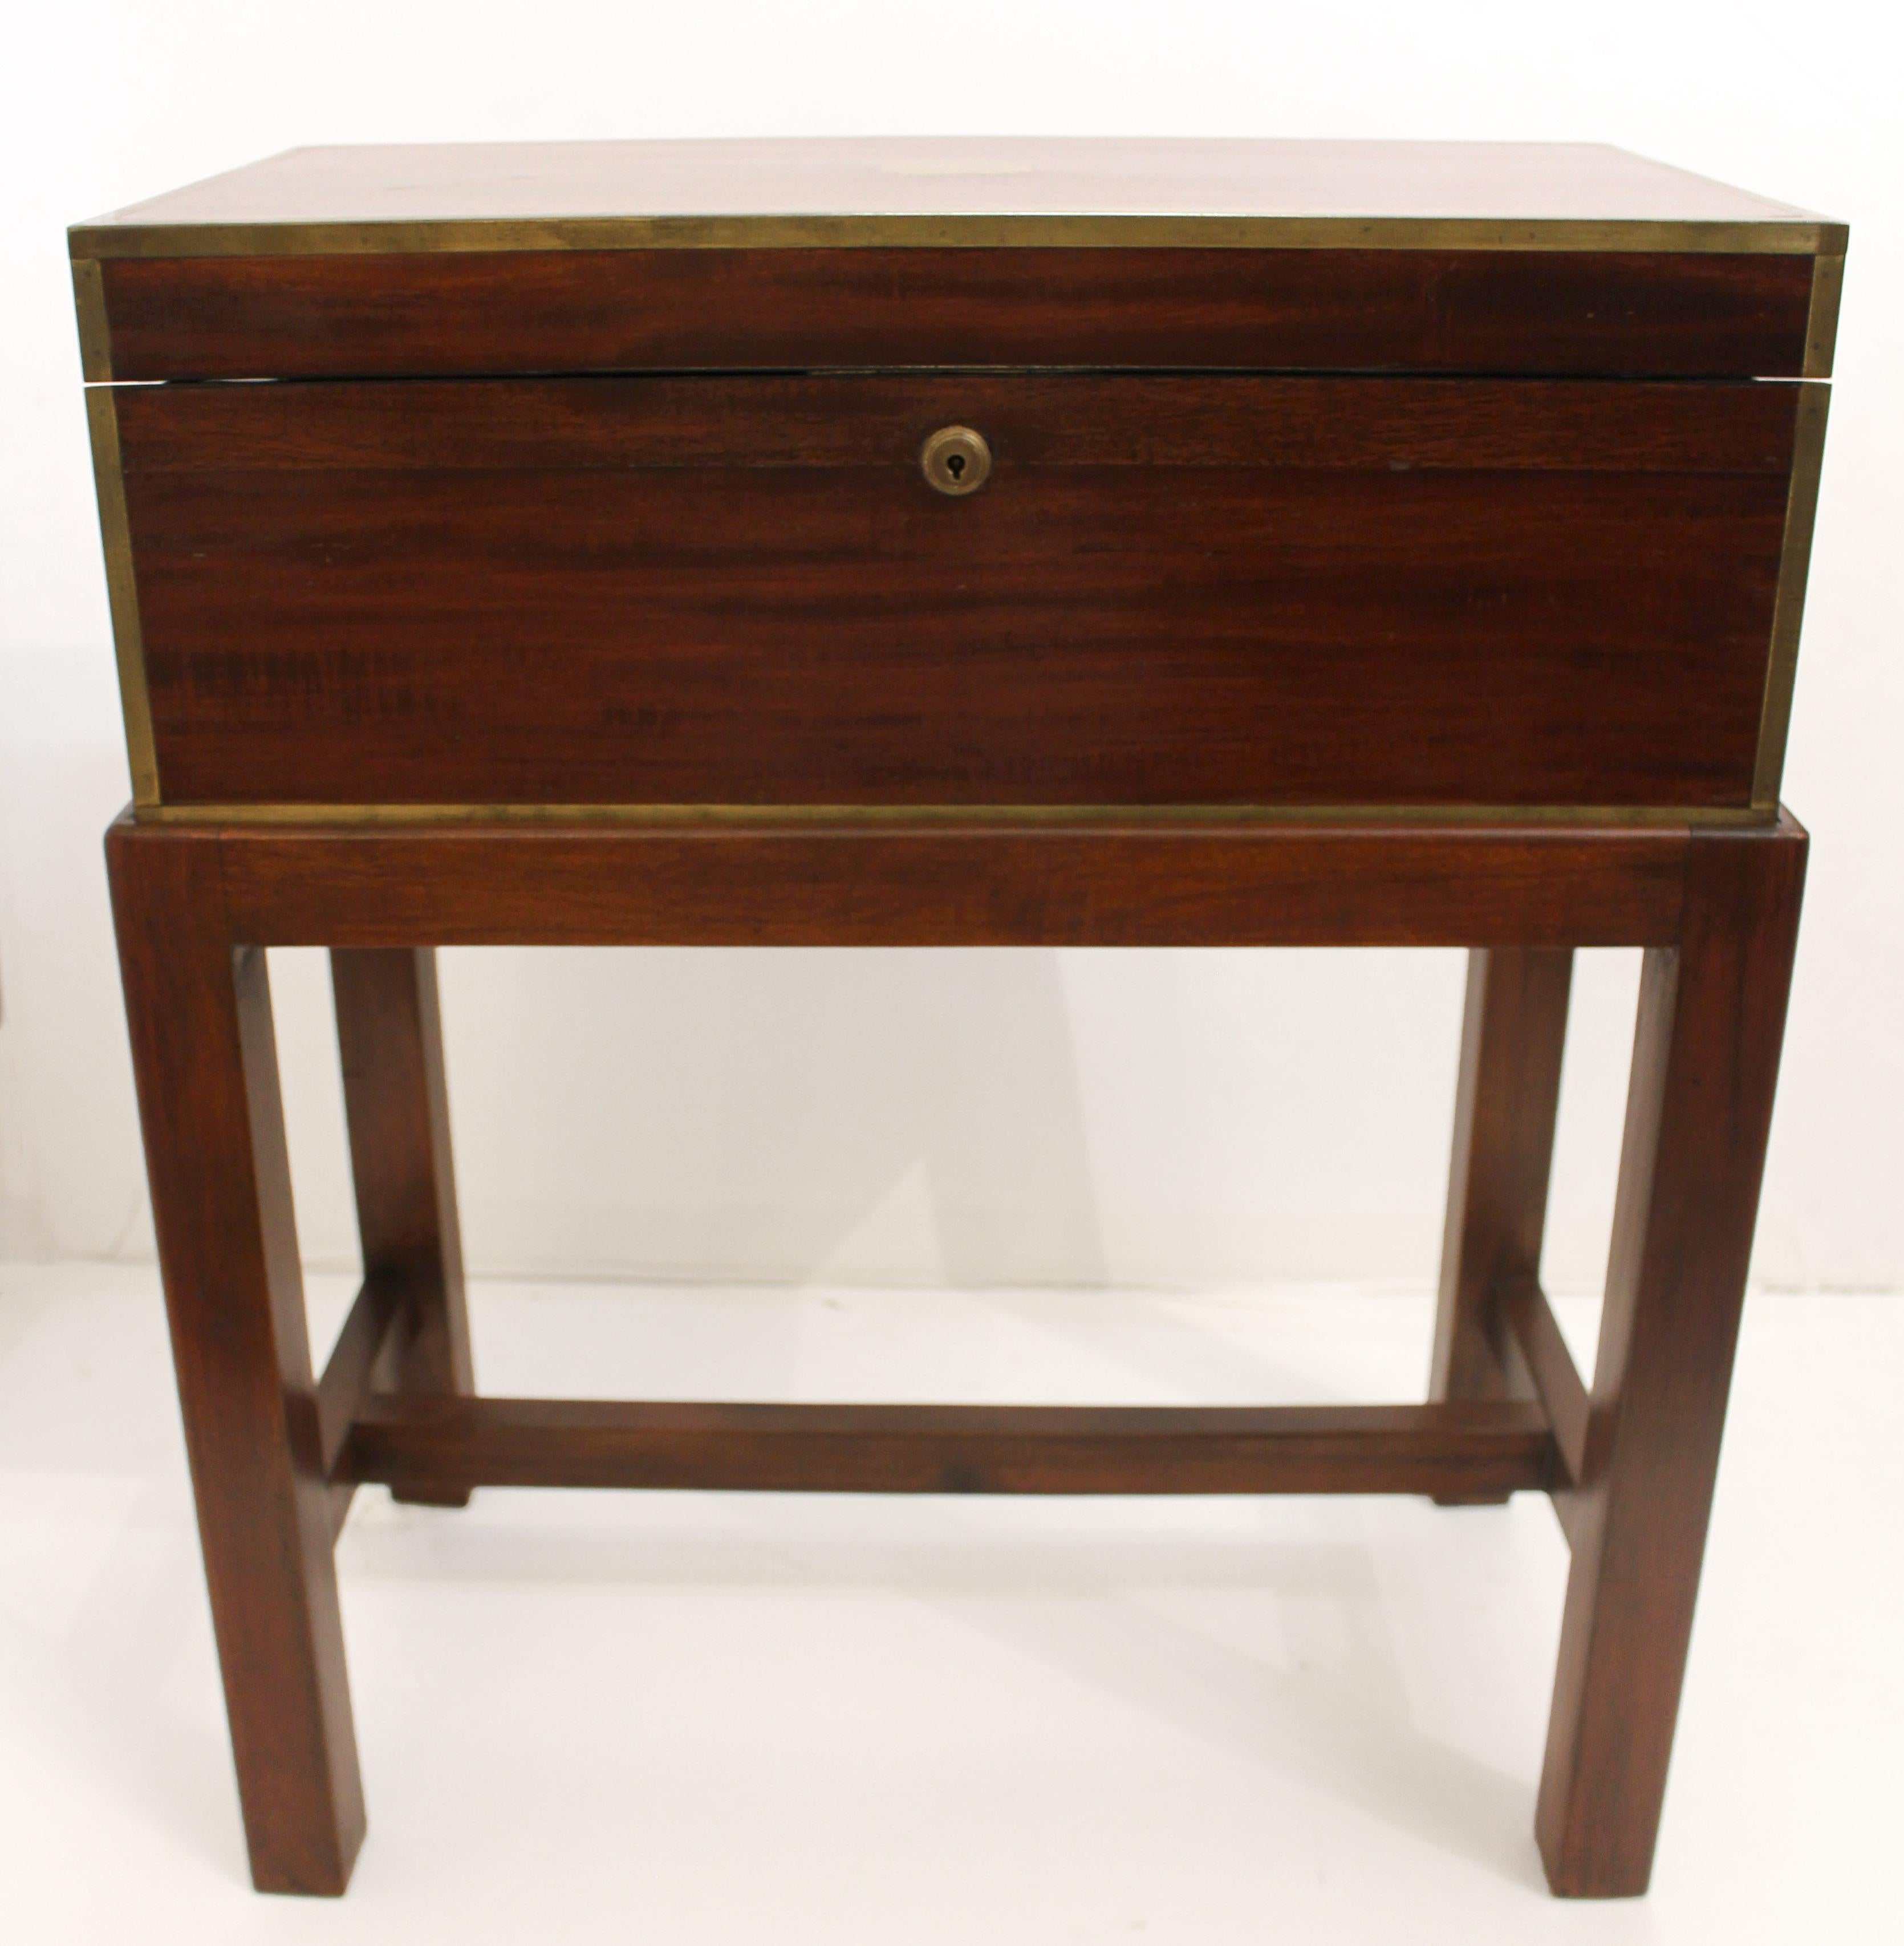 Circa 1860 lap desk now on custom made side table stand, English. Campaign lap desk of rosewood with fully marked Bramah lock. Full brass edging, monogram cartouche & inset flat handles. Velvet lined writing slope. Nicely fitted coromandel veneered